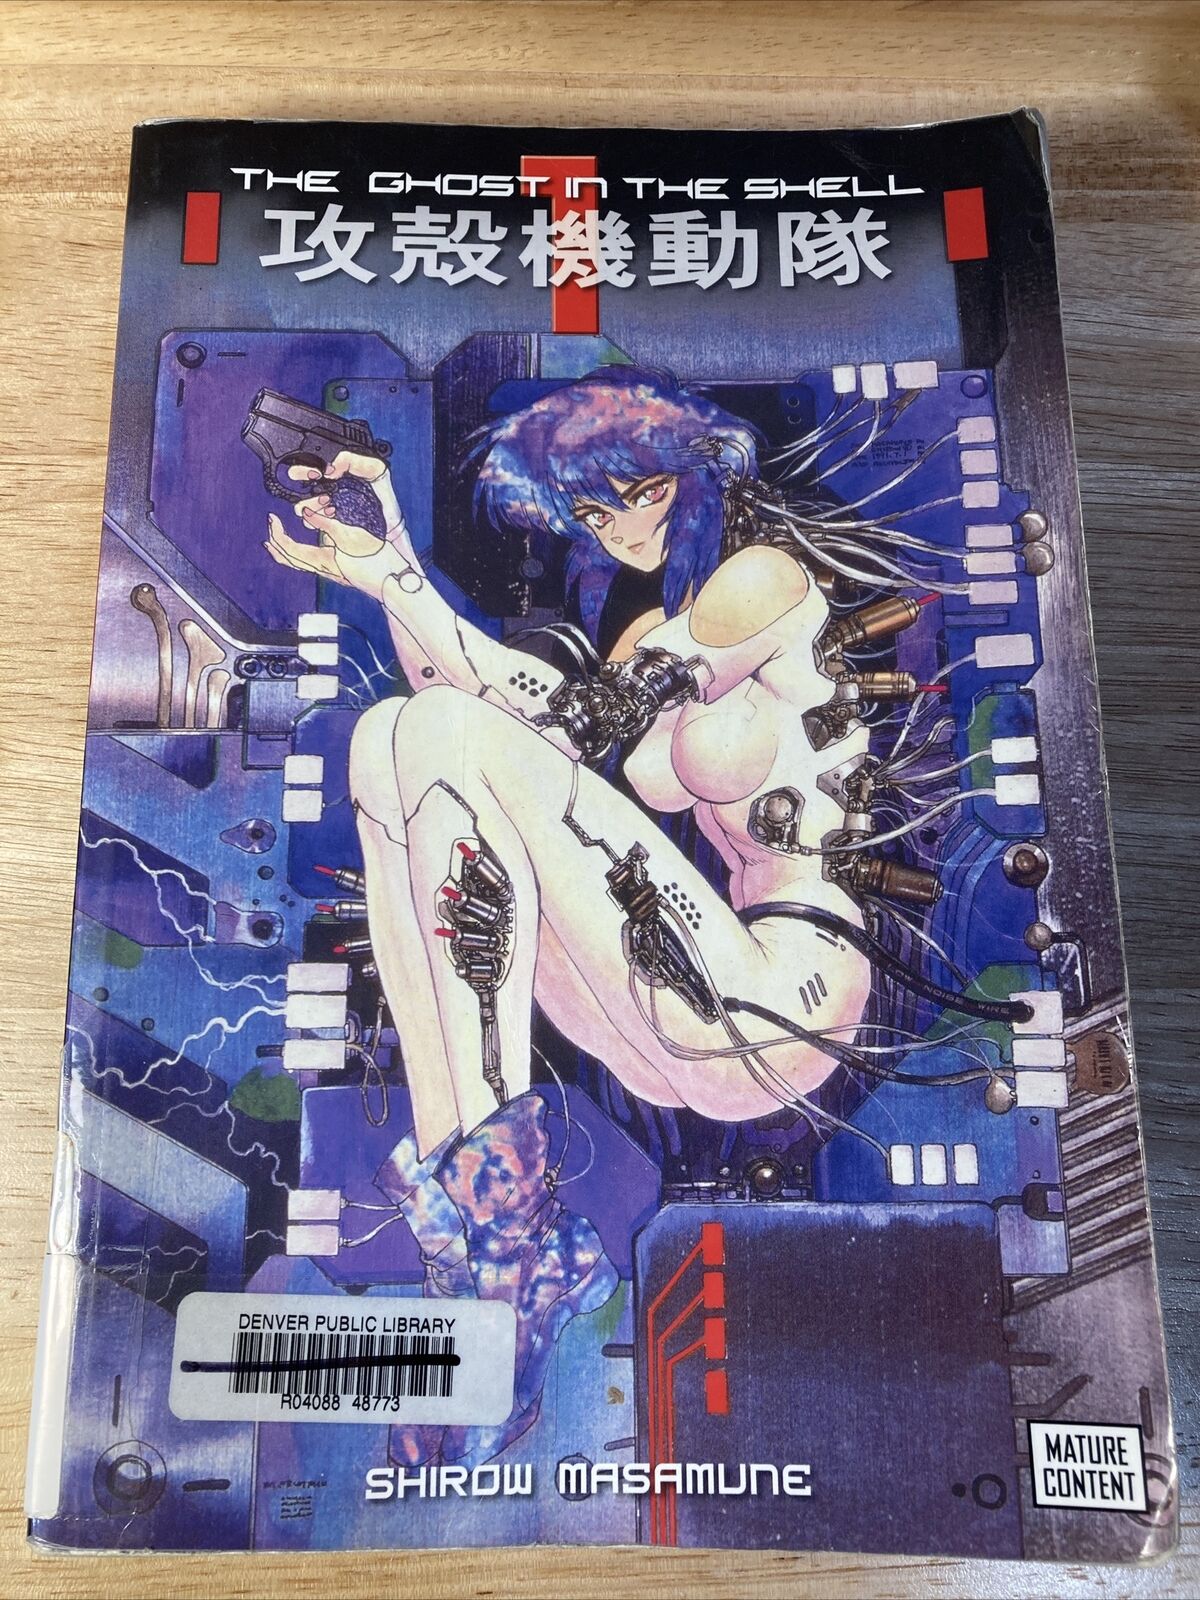 The Ghost in the Shell Volume 1 by Shirow Masamune (English) Ex Library